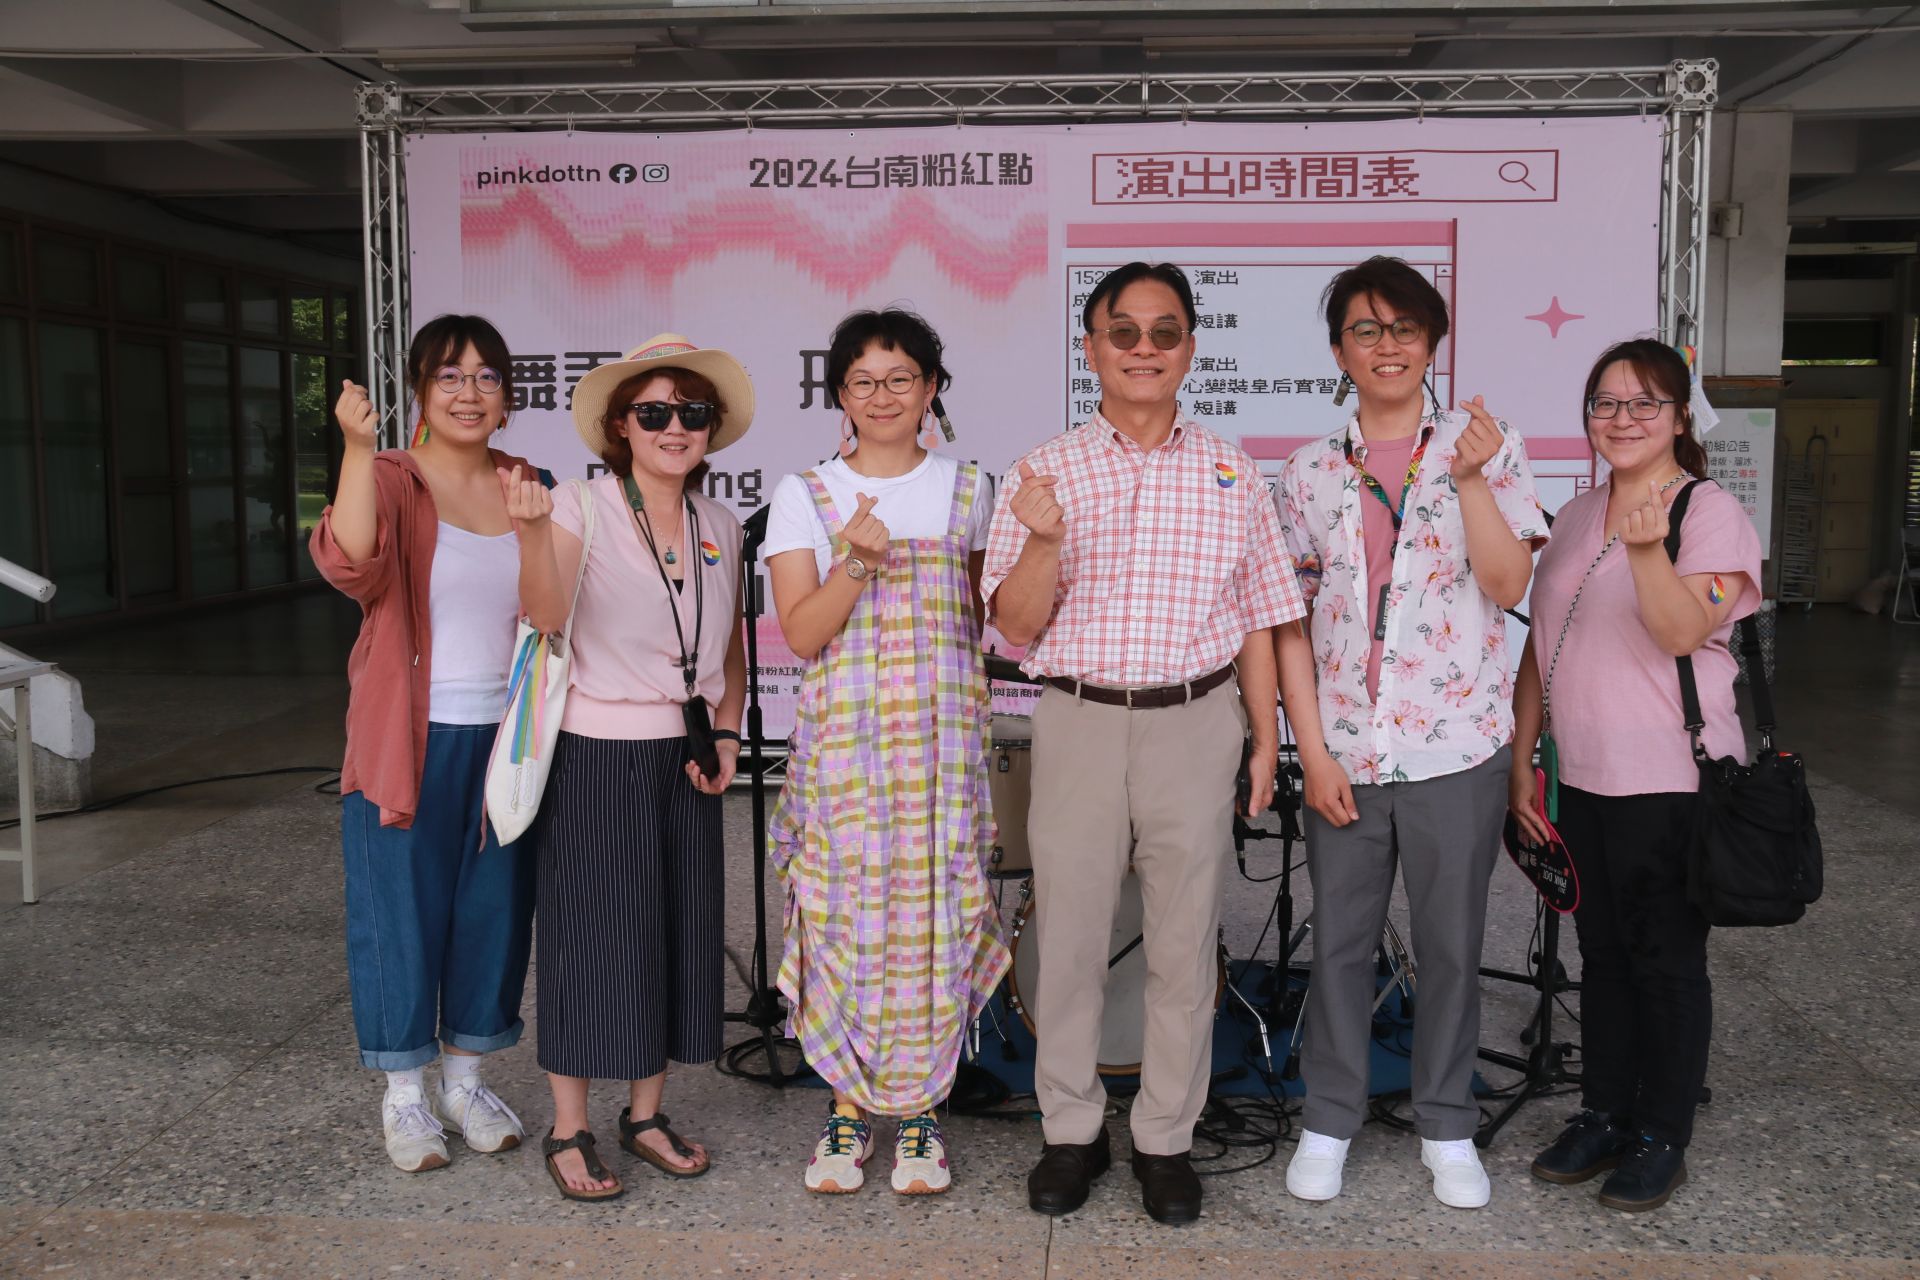 10 Years of Tainan's Pink Dot: NCKU Hopes to Create a Diverse and Gender-Friendly Campus for Students